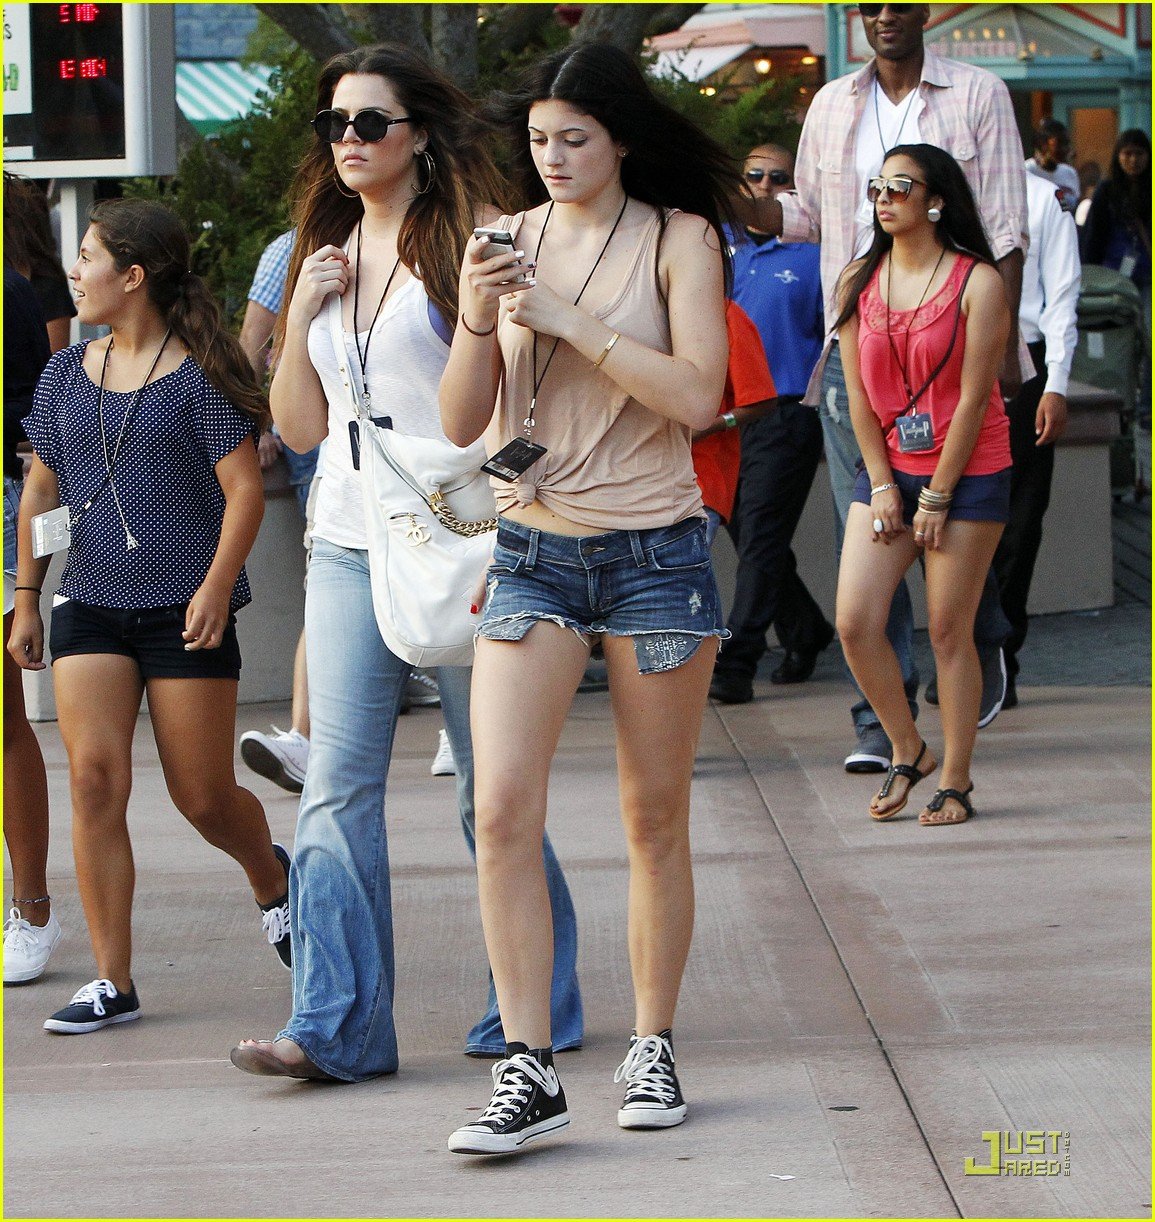 kylie kendall jenner universal city 10